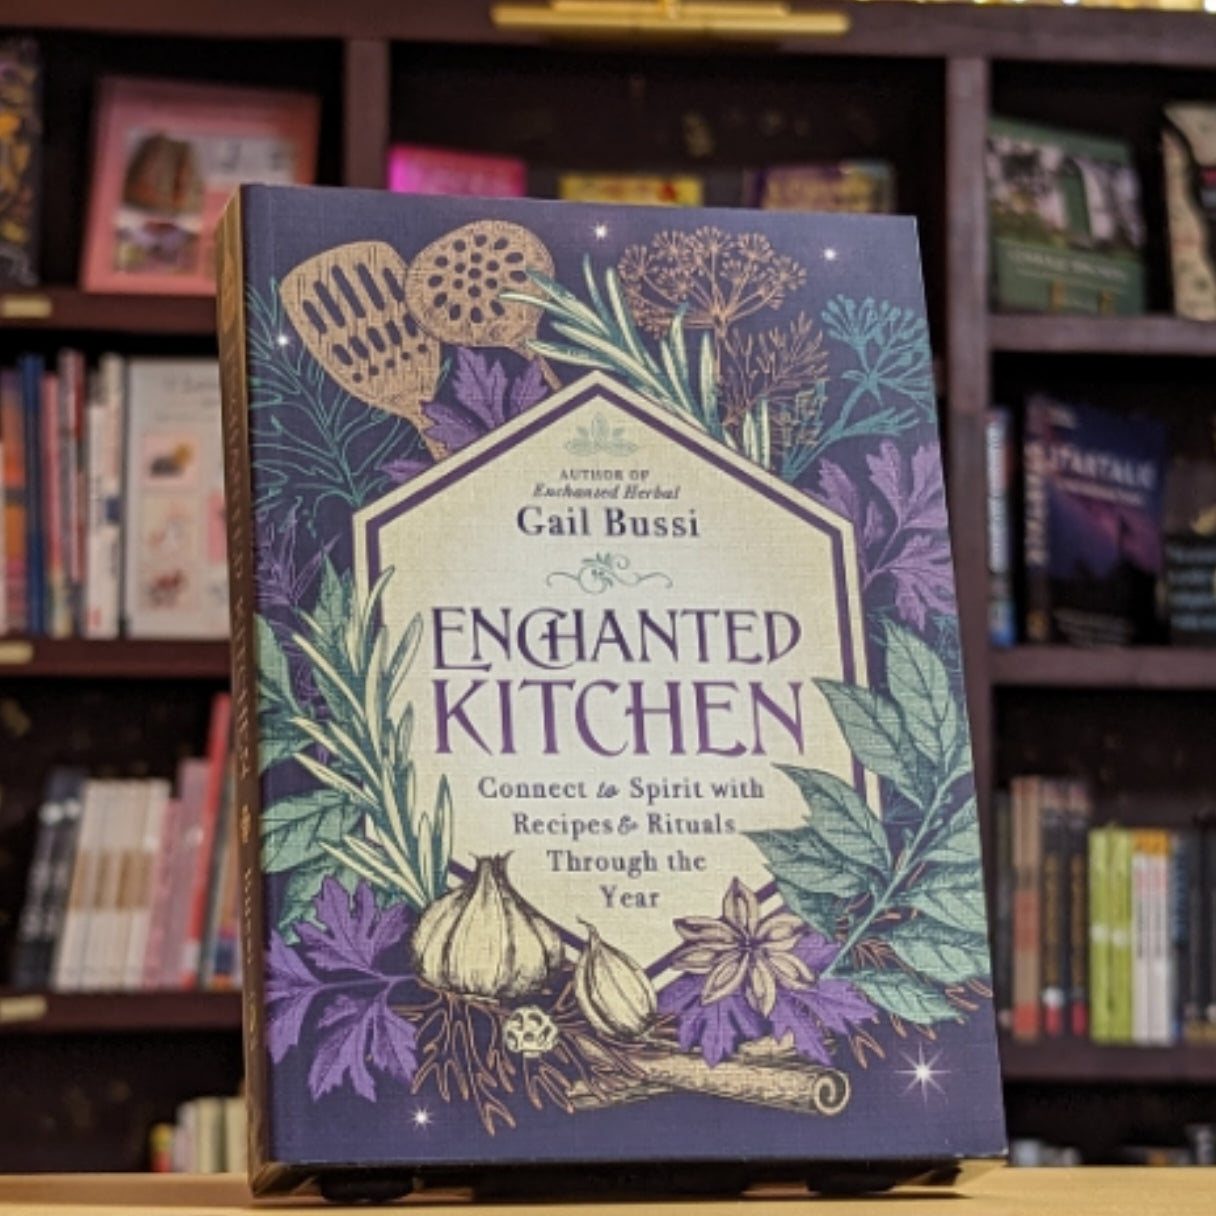 Enchanted Kitchen: Connect to Spirit with Recipes & Rituals through the Year